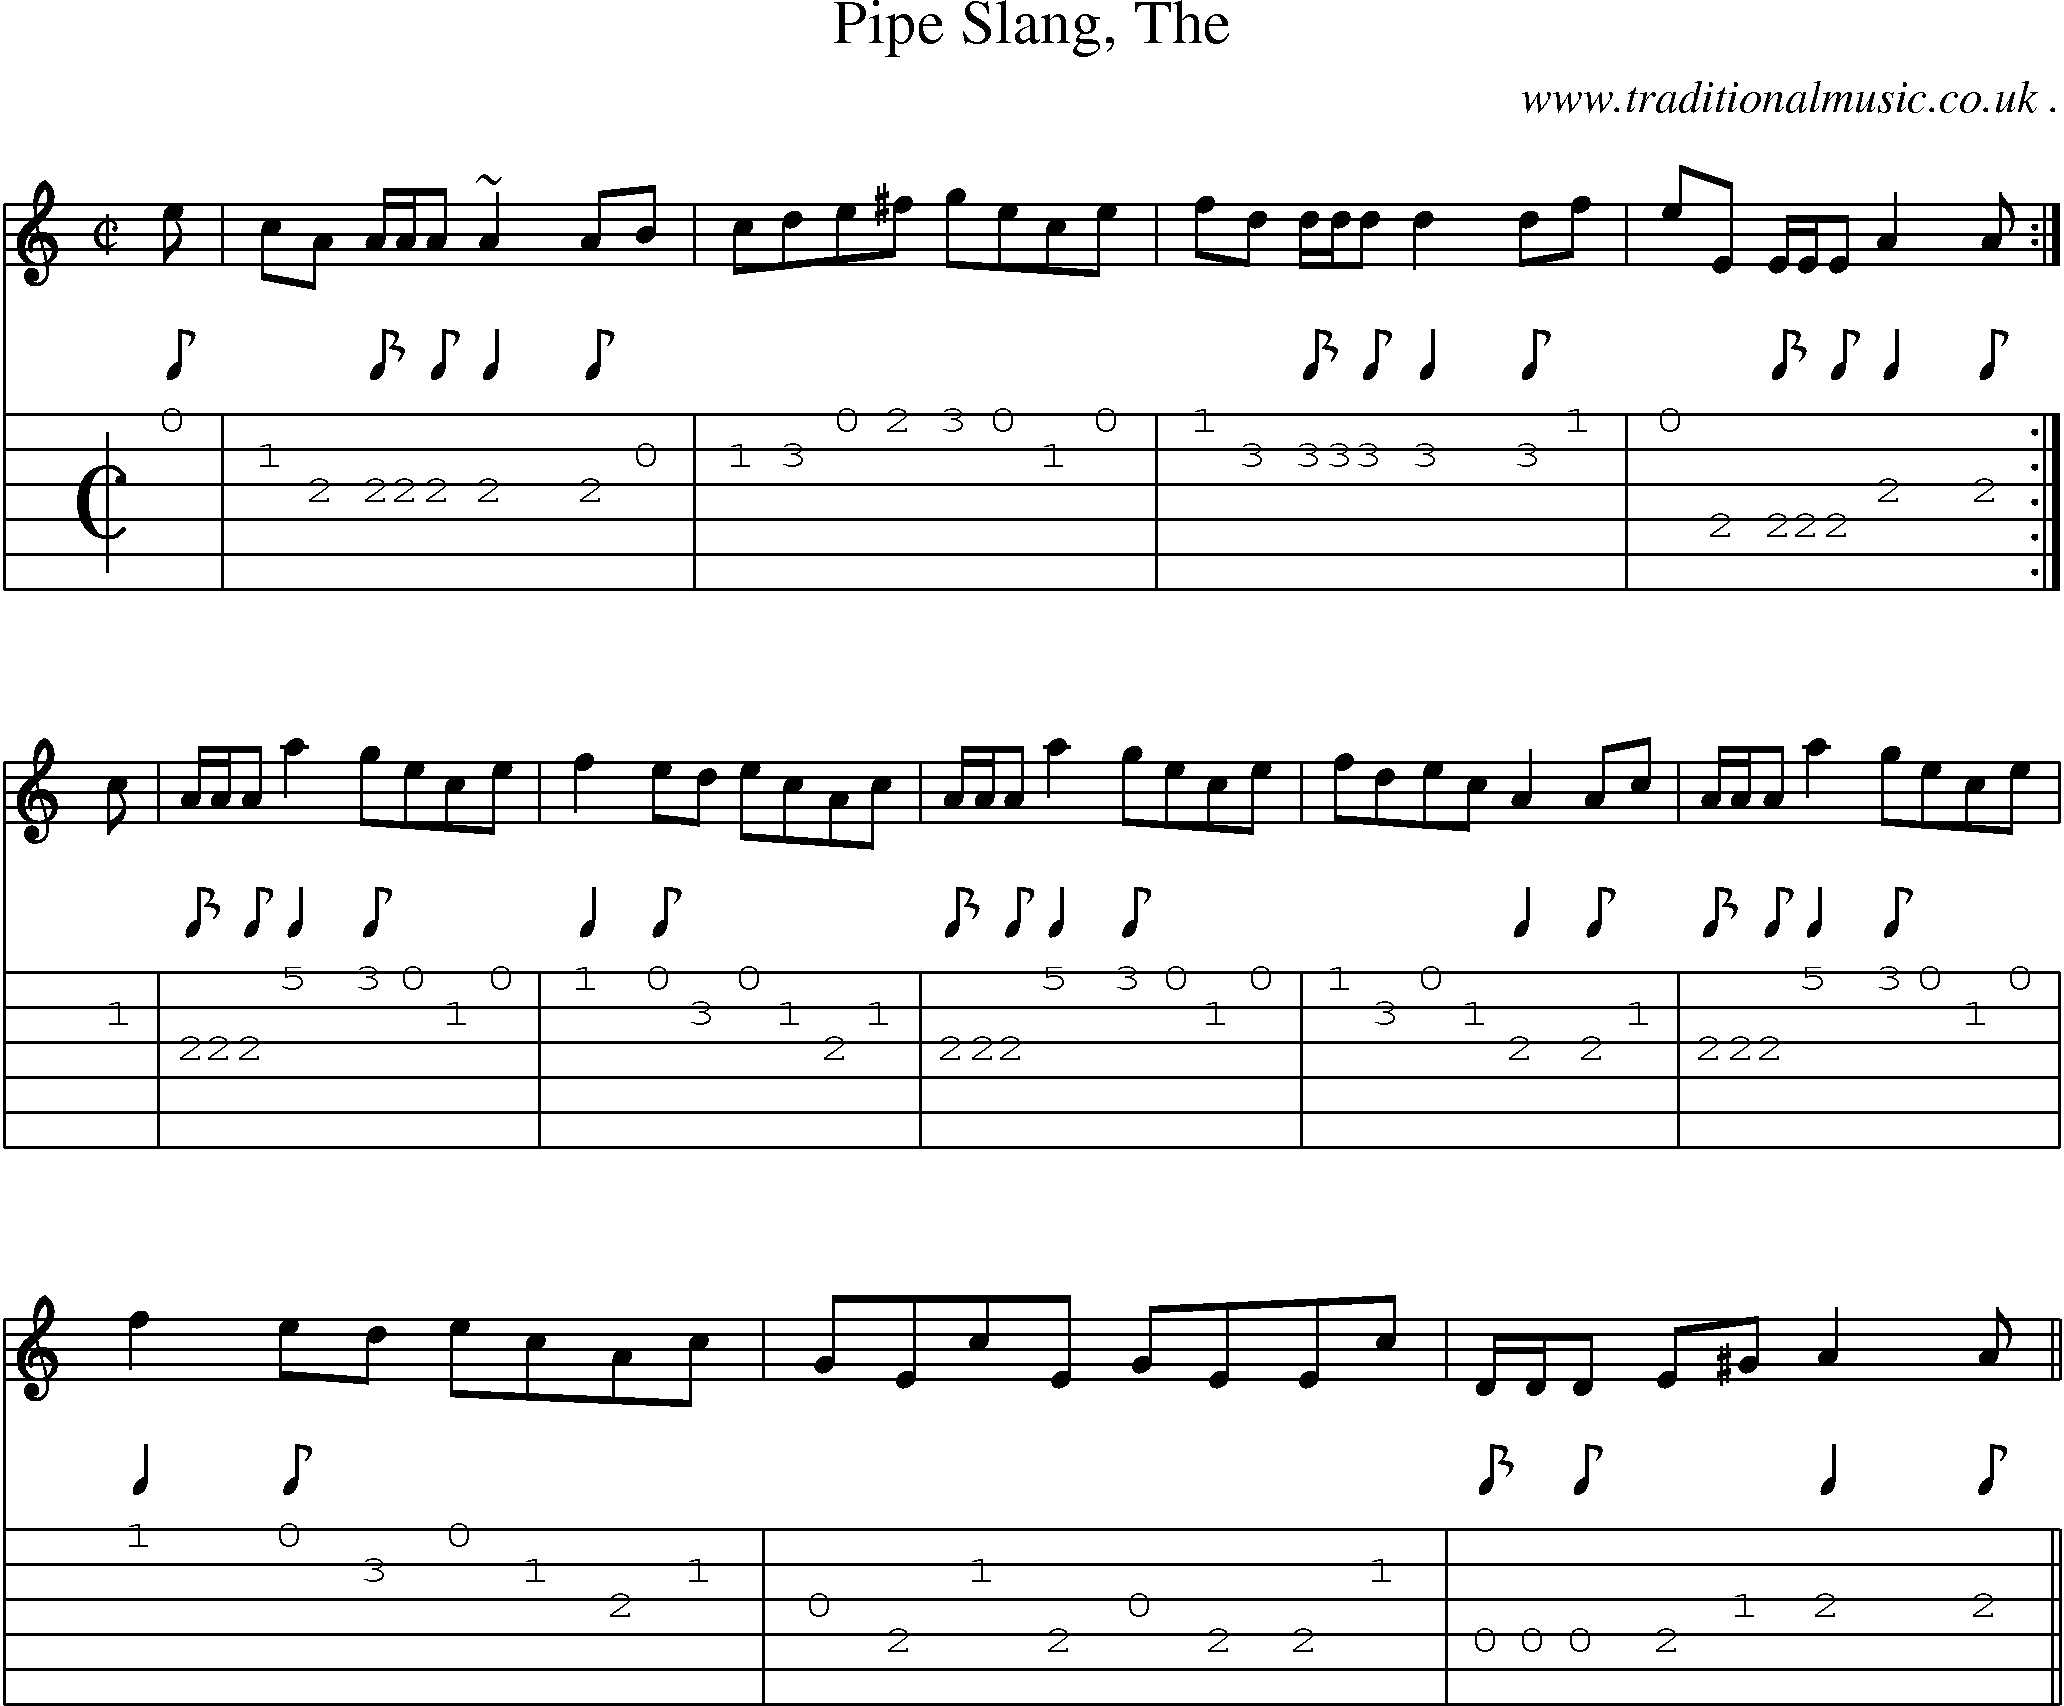 Sheet-music  score, Chords and Guitar Tabs for Pipe Slang The